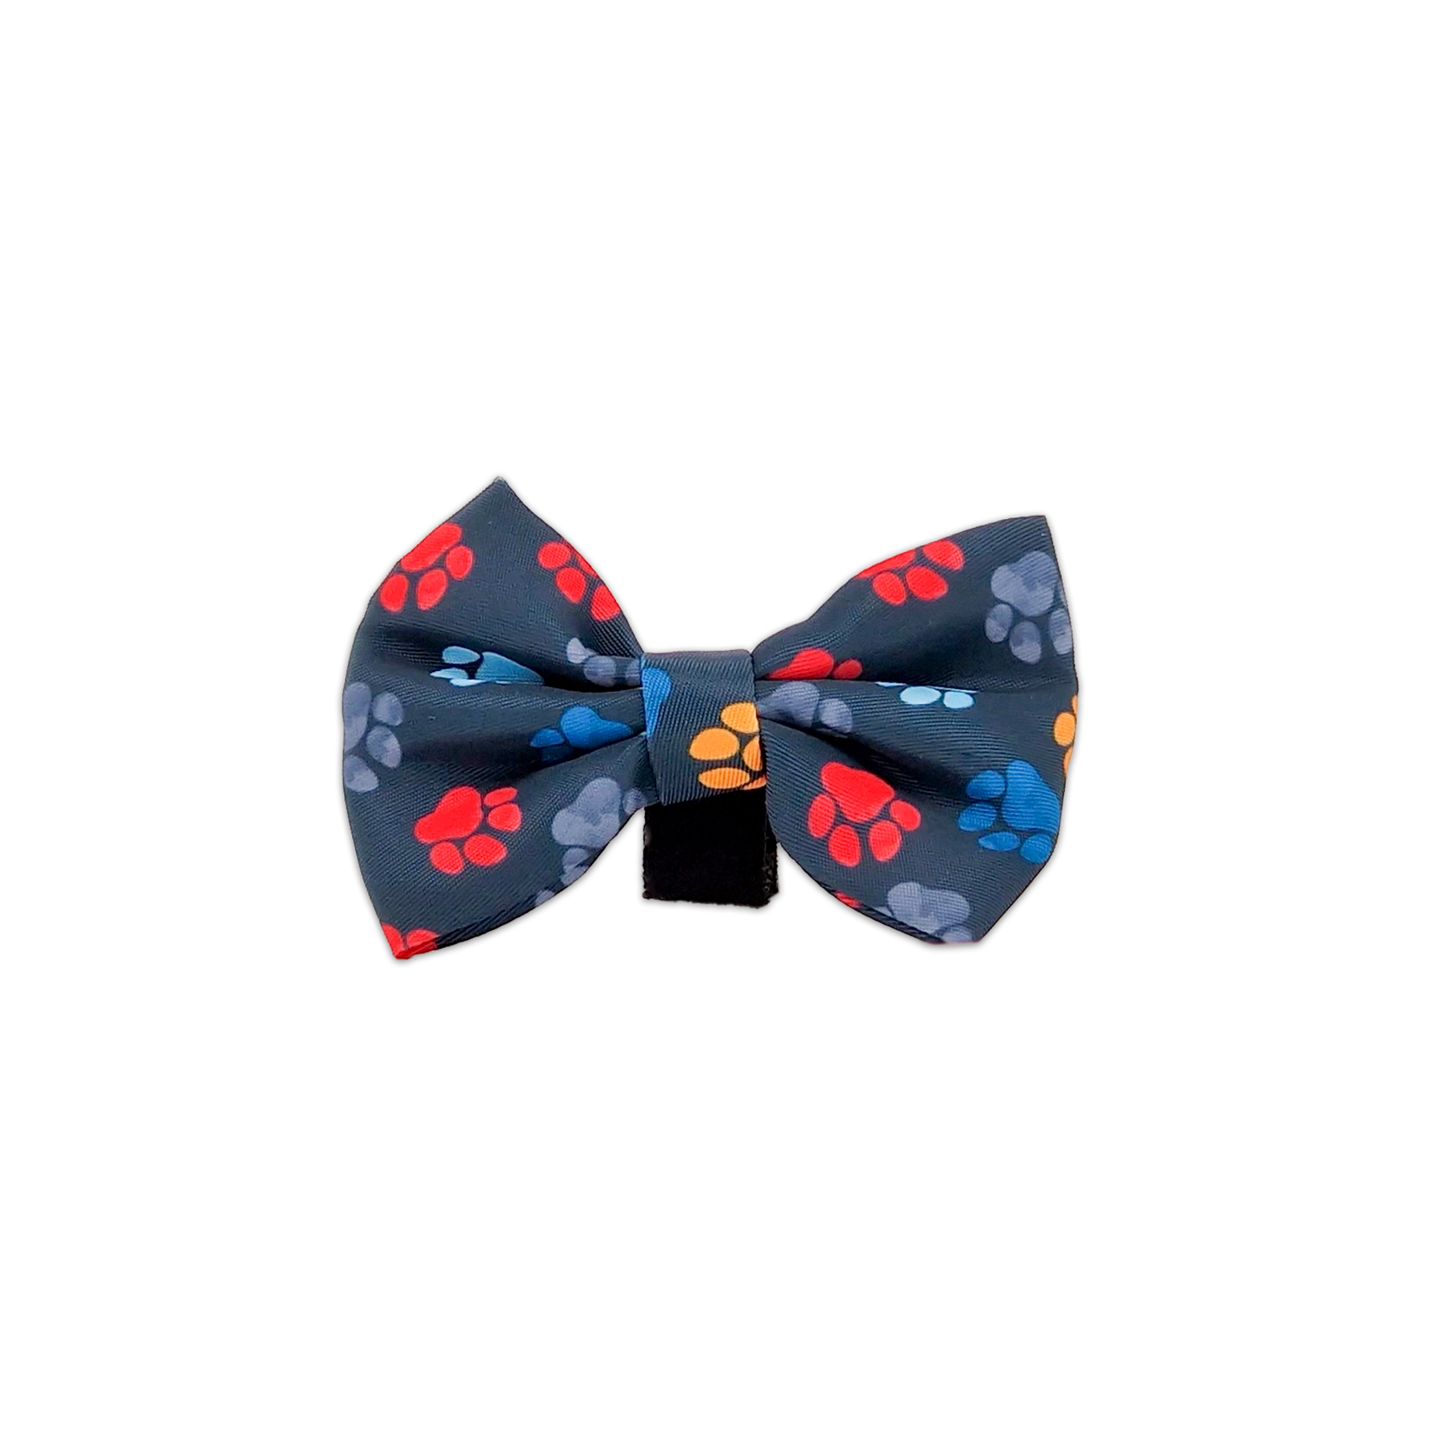 You are my Universe Bow Tie